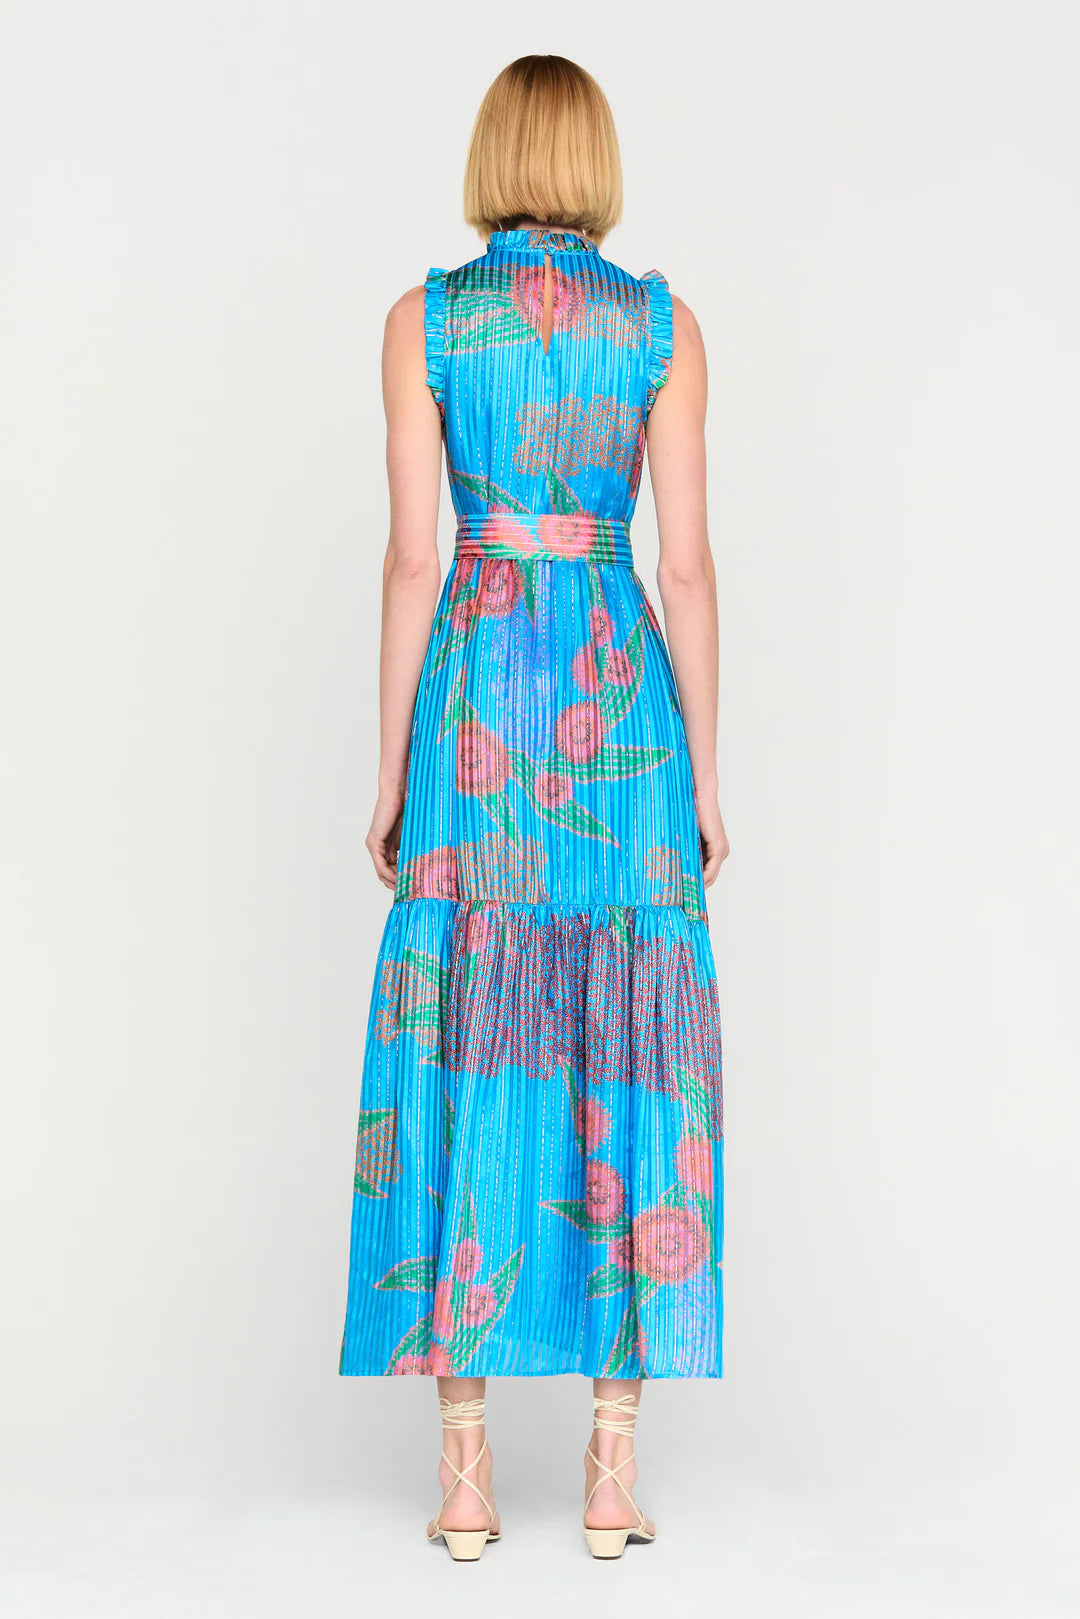 Marie Oliver Alice Dress | Peacock